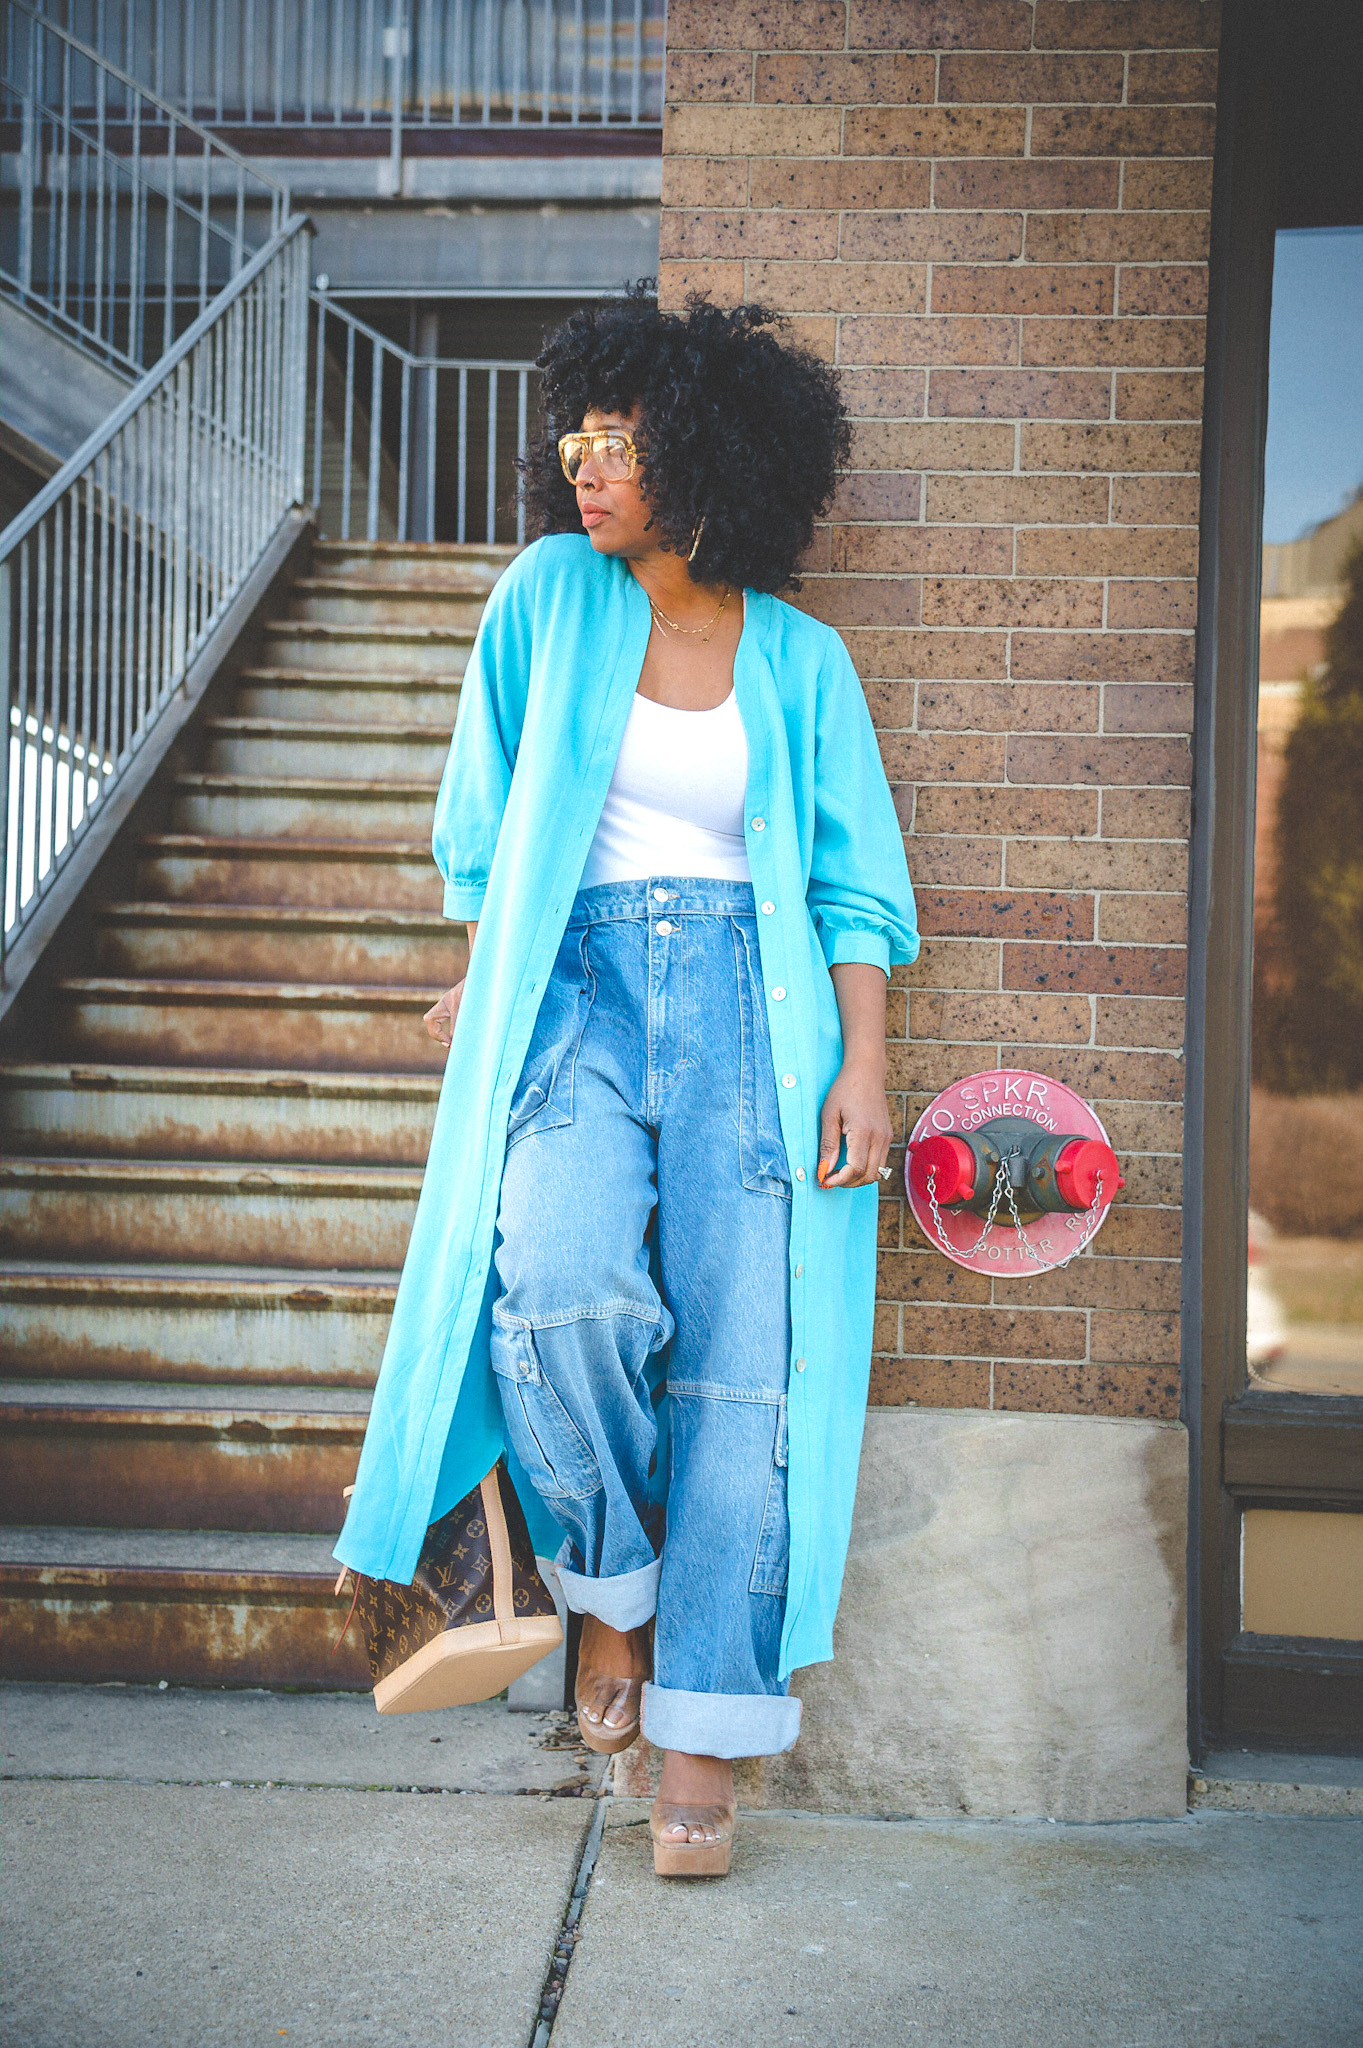 Sweenee Style, Spring Outfit Ideas, Free People Jeans, How to wear Denim Cargo Jeans, Louis Vuitton, Black Girls who Blog, Fashion Influencer, Indianapolis Fashion Blog, womans fashion for winter outfits, outfit ideas, outfit inspiration, outfits fashion, outfit, outfit casual, outfit fashion, outfits ideas, outfit idea, outfit